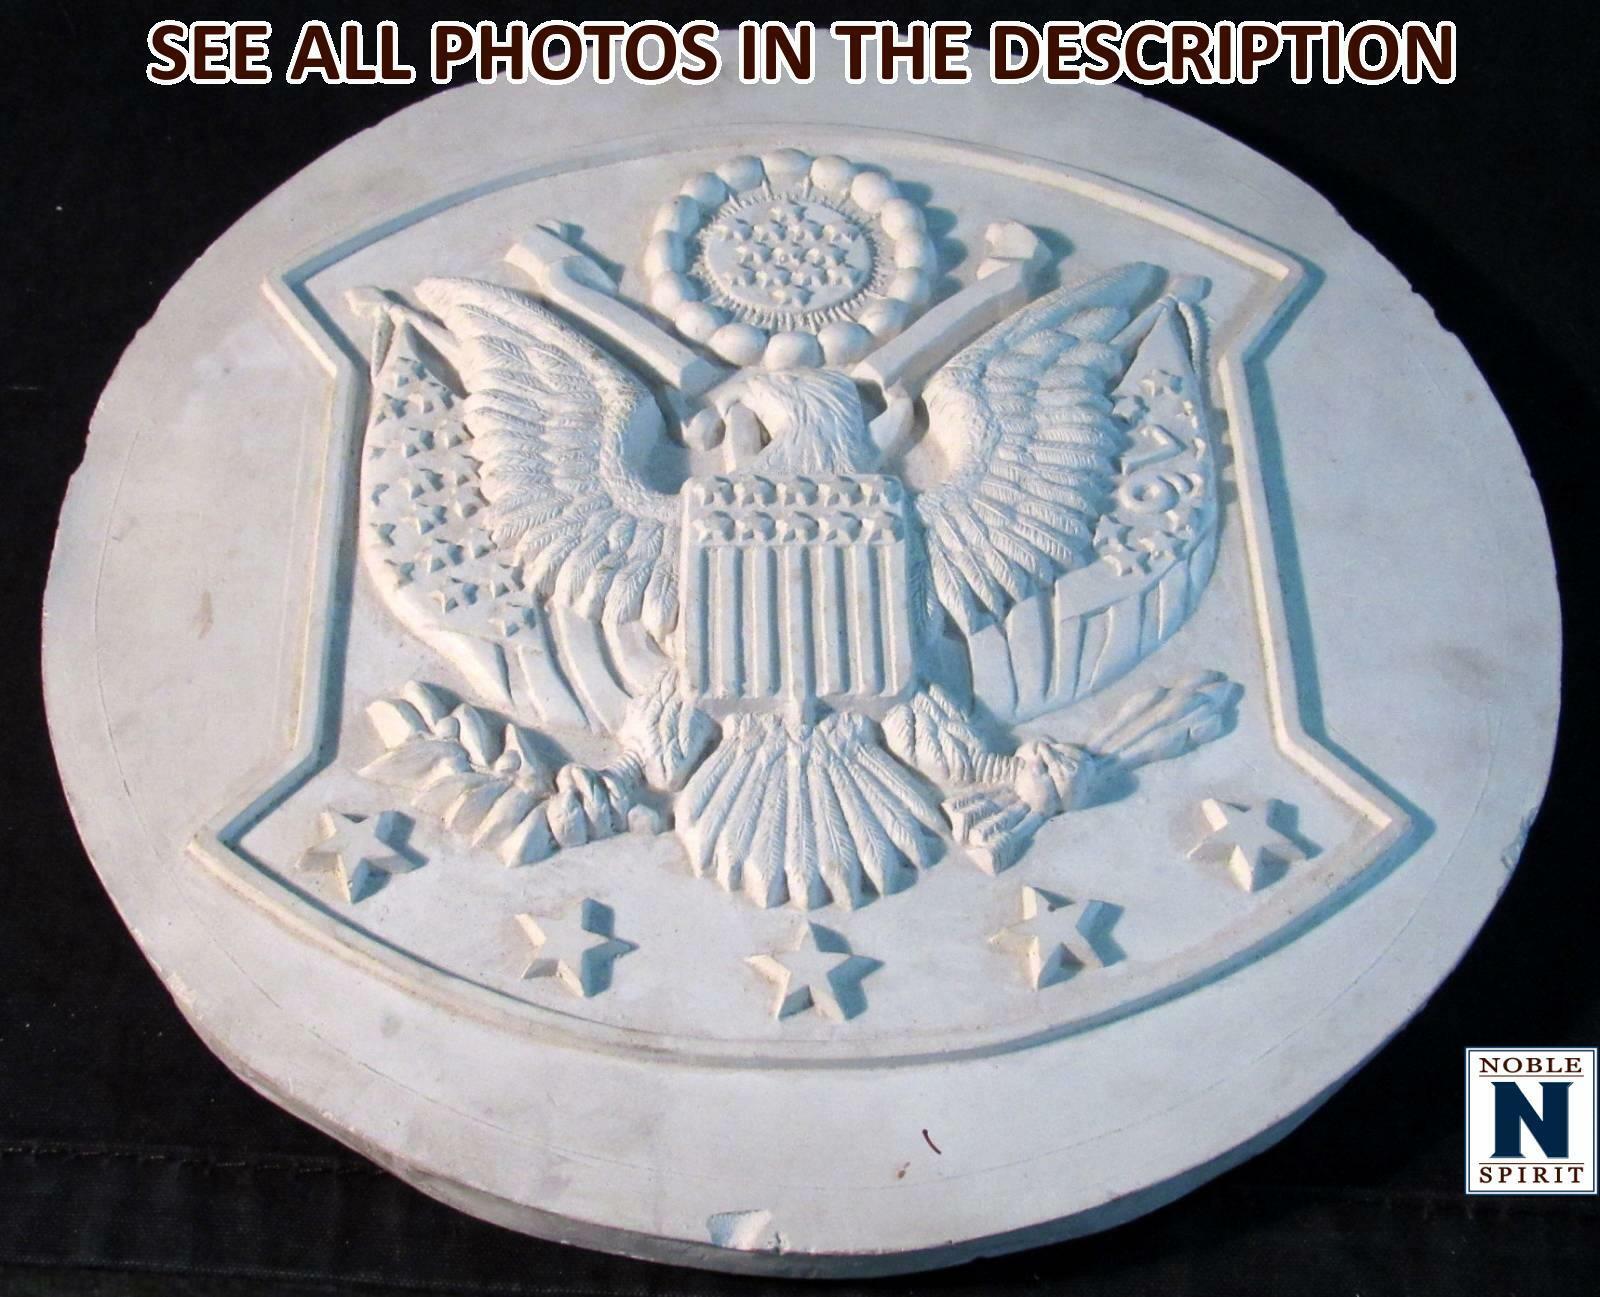 NobleSpirit Antique Americana: 12 Inch Plaster Seal of The US